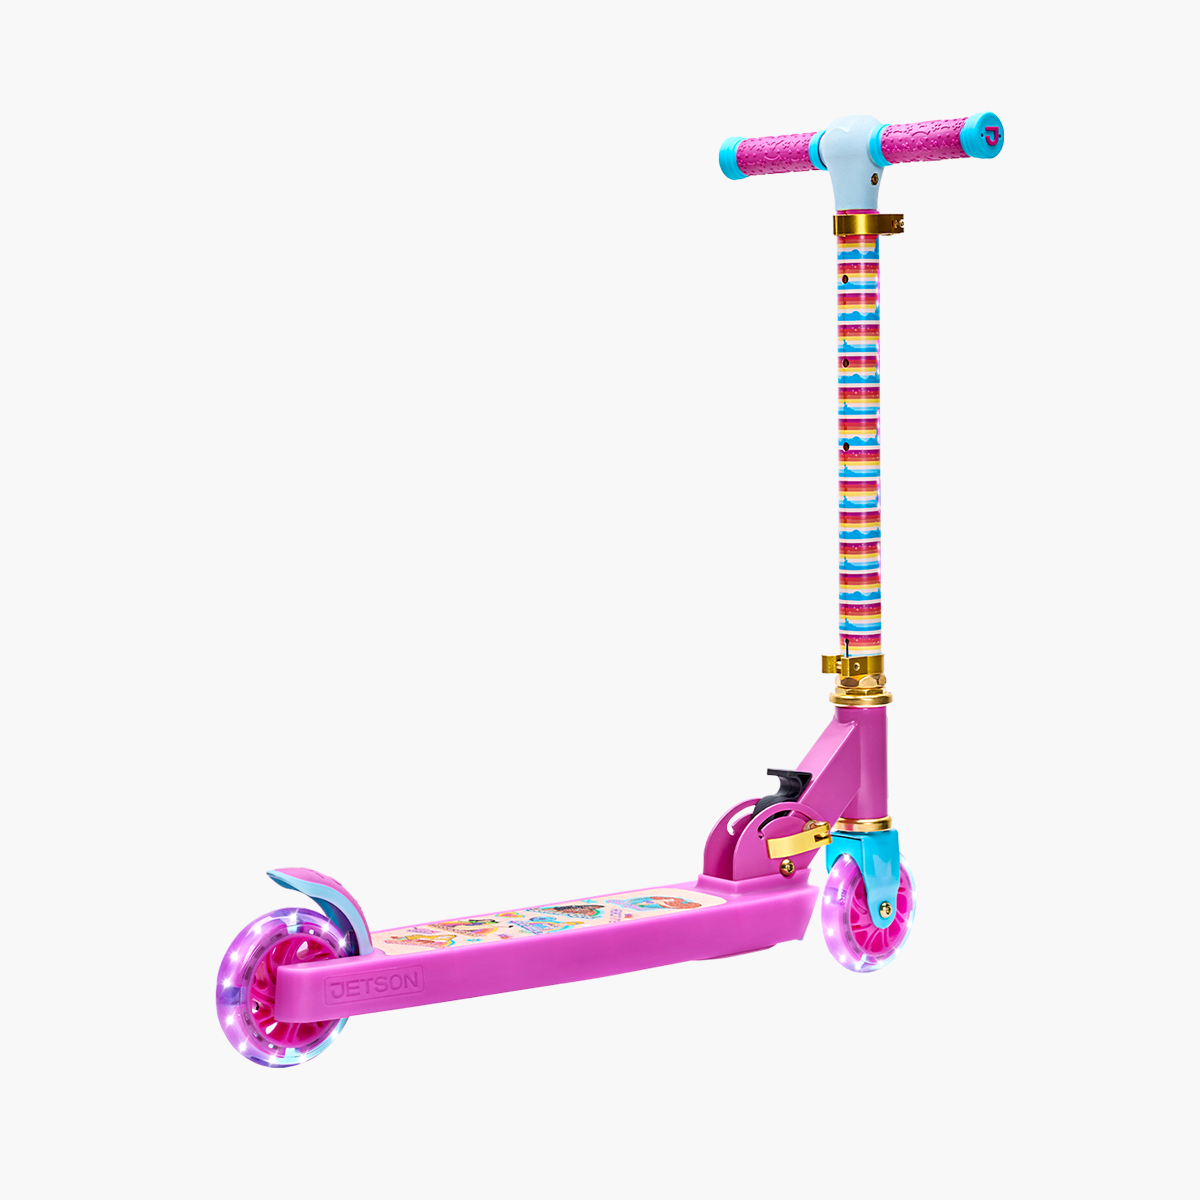 side view of the Princess kick scooter